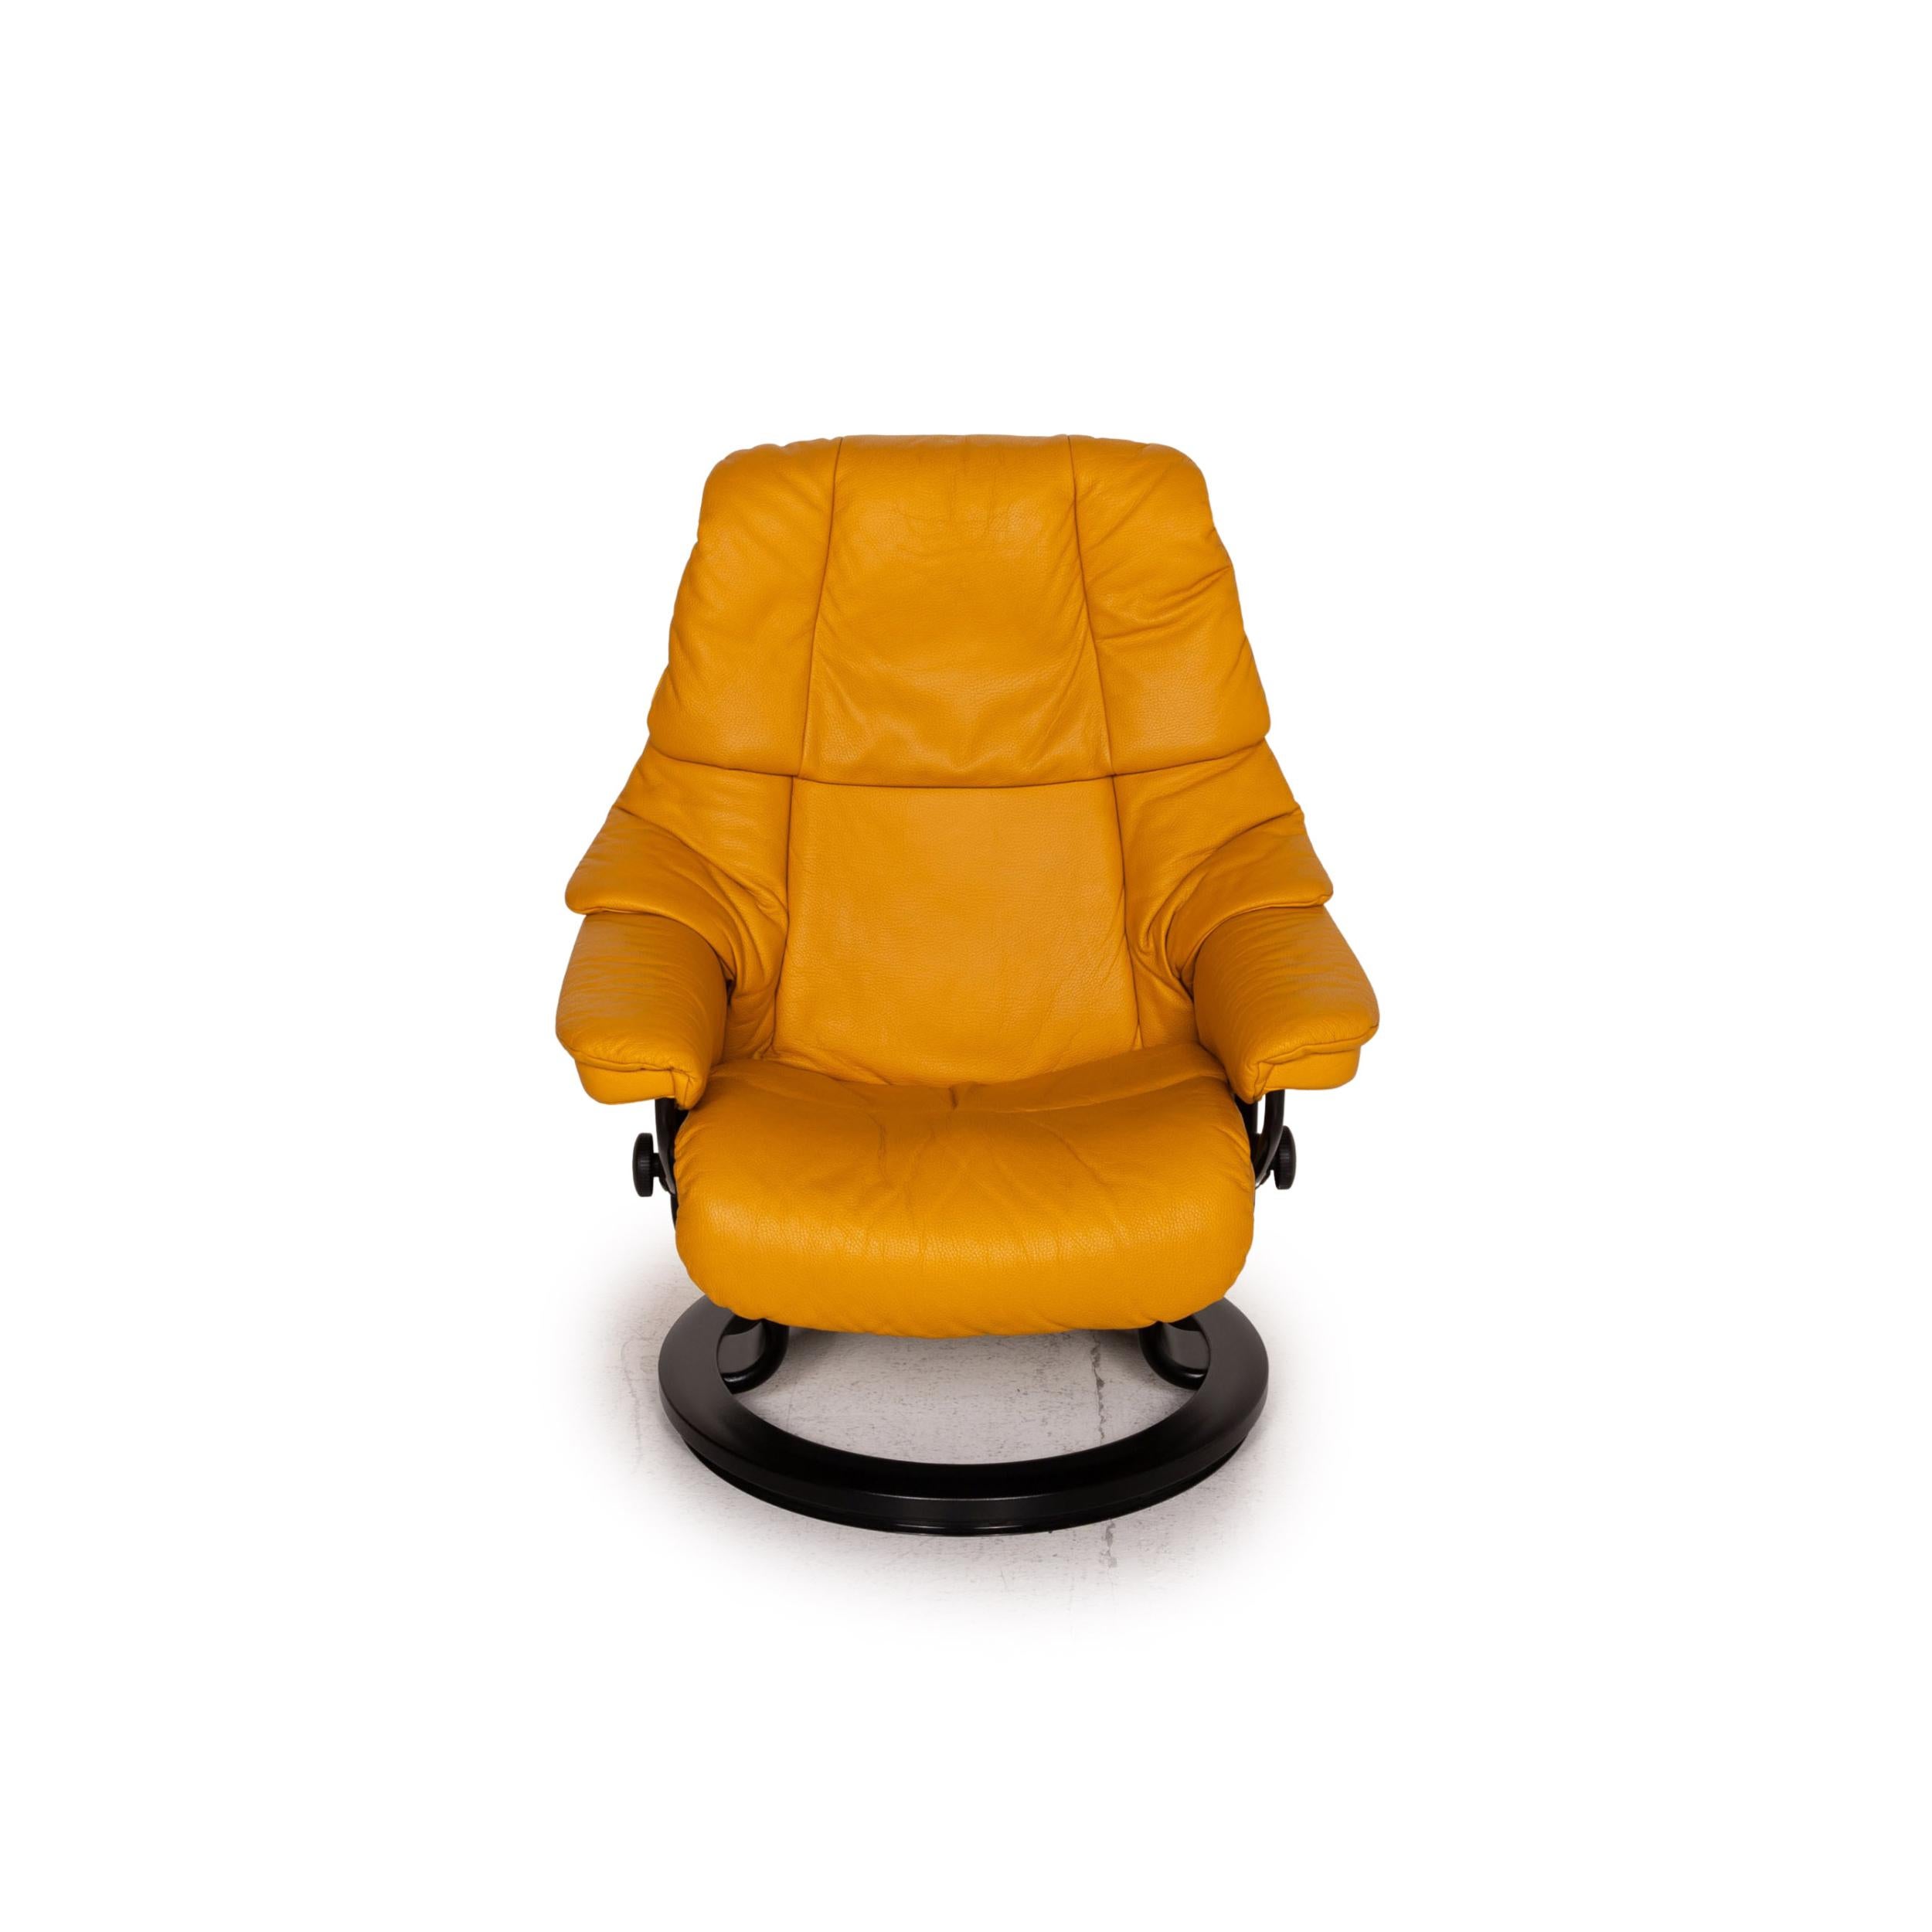 Stressless Reno Leather Recliner Yellow Armchair 1